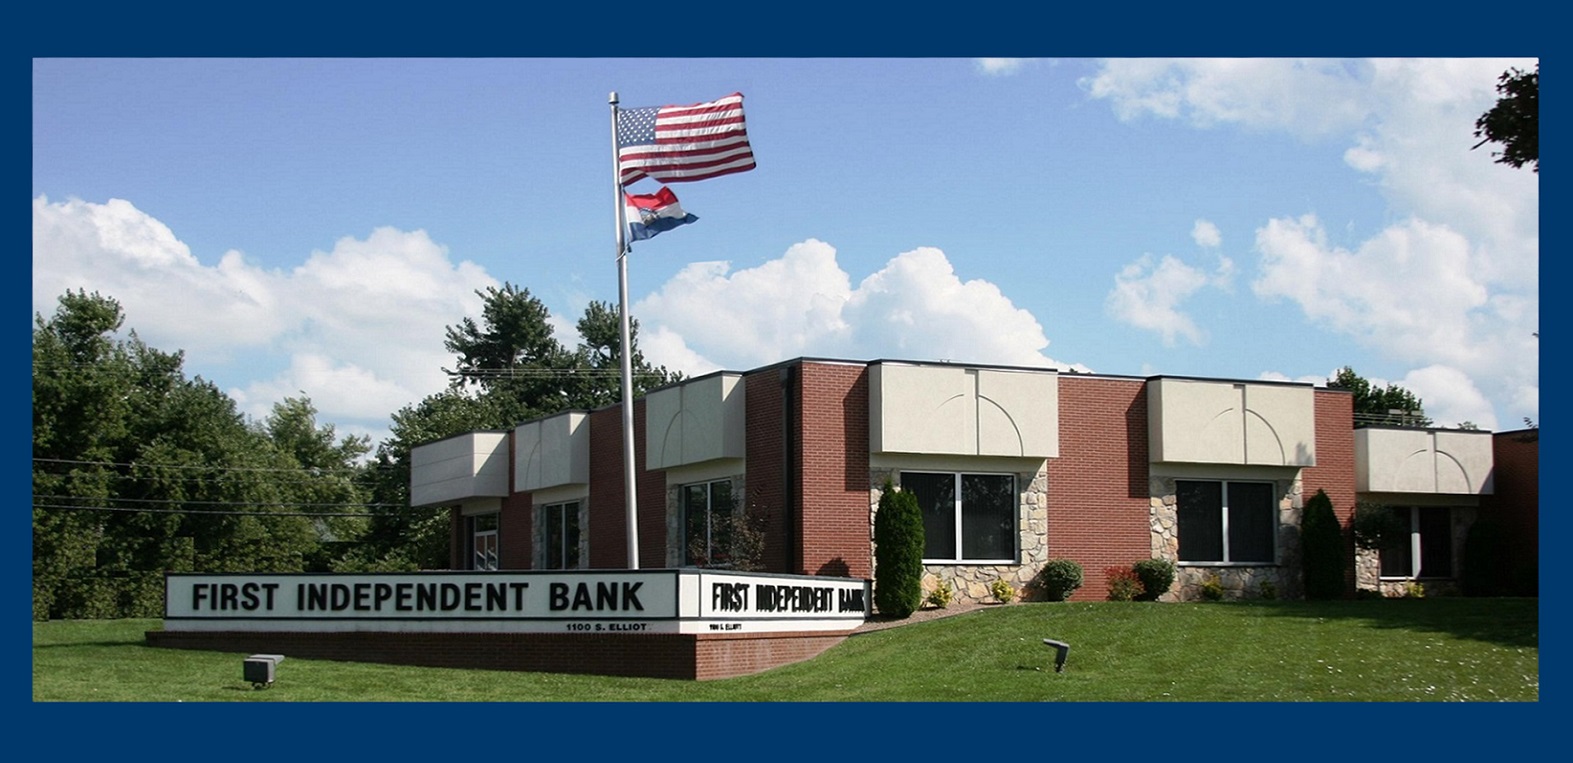 First Independent Bank Building - Slideshow flag flipped